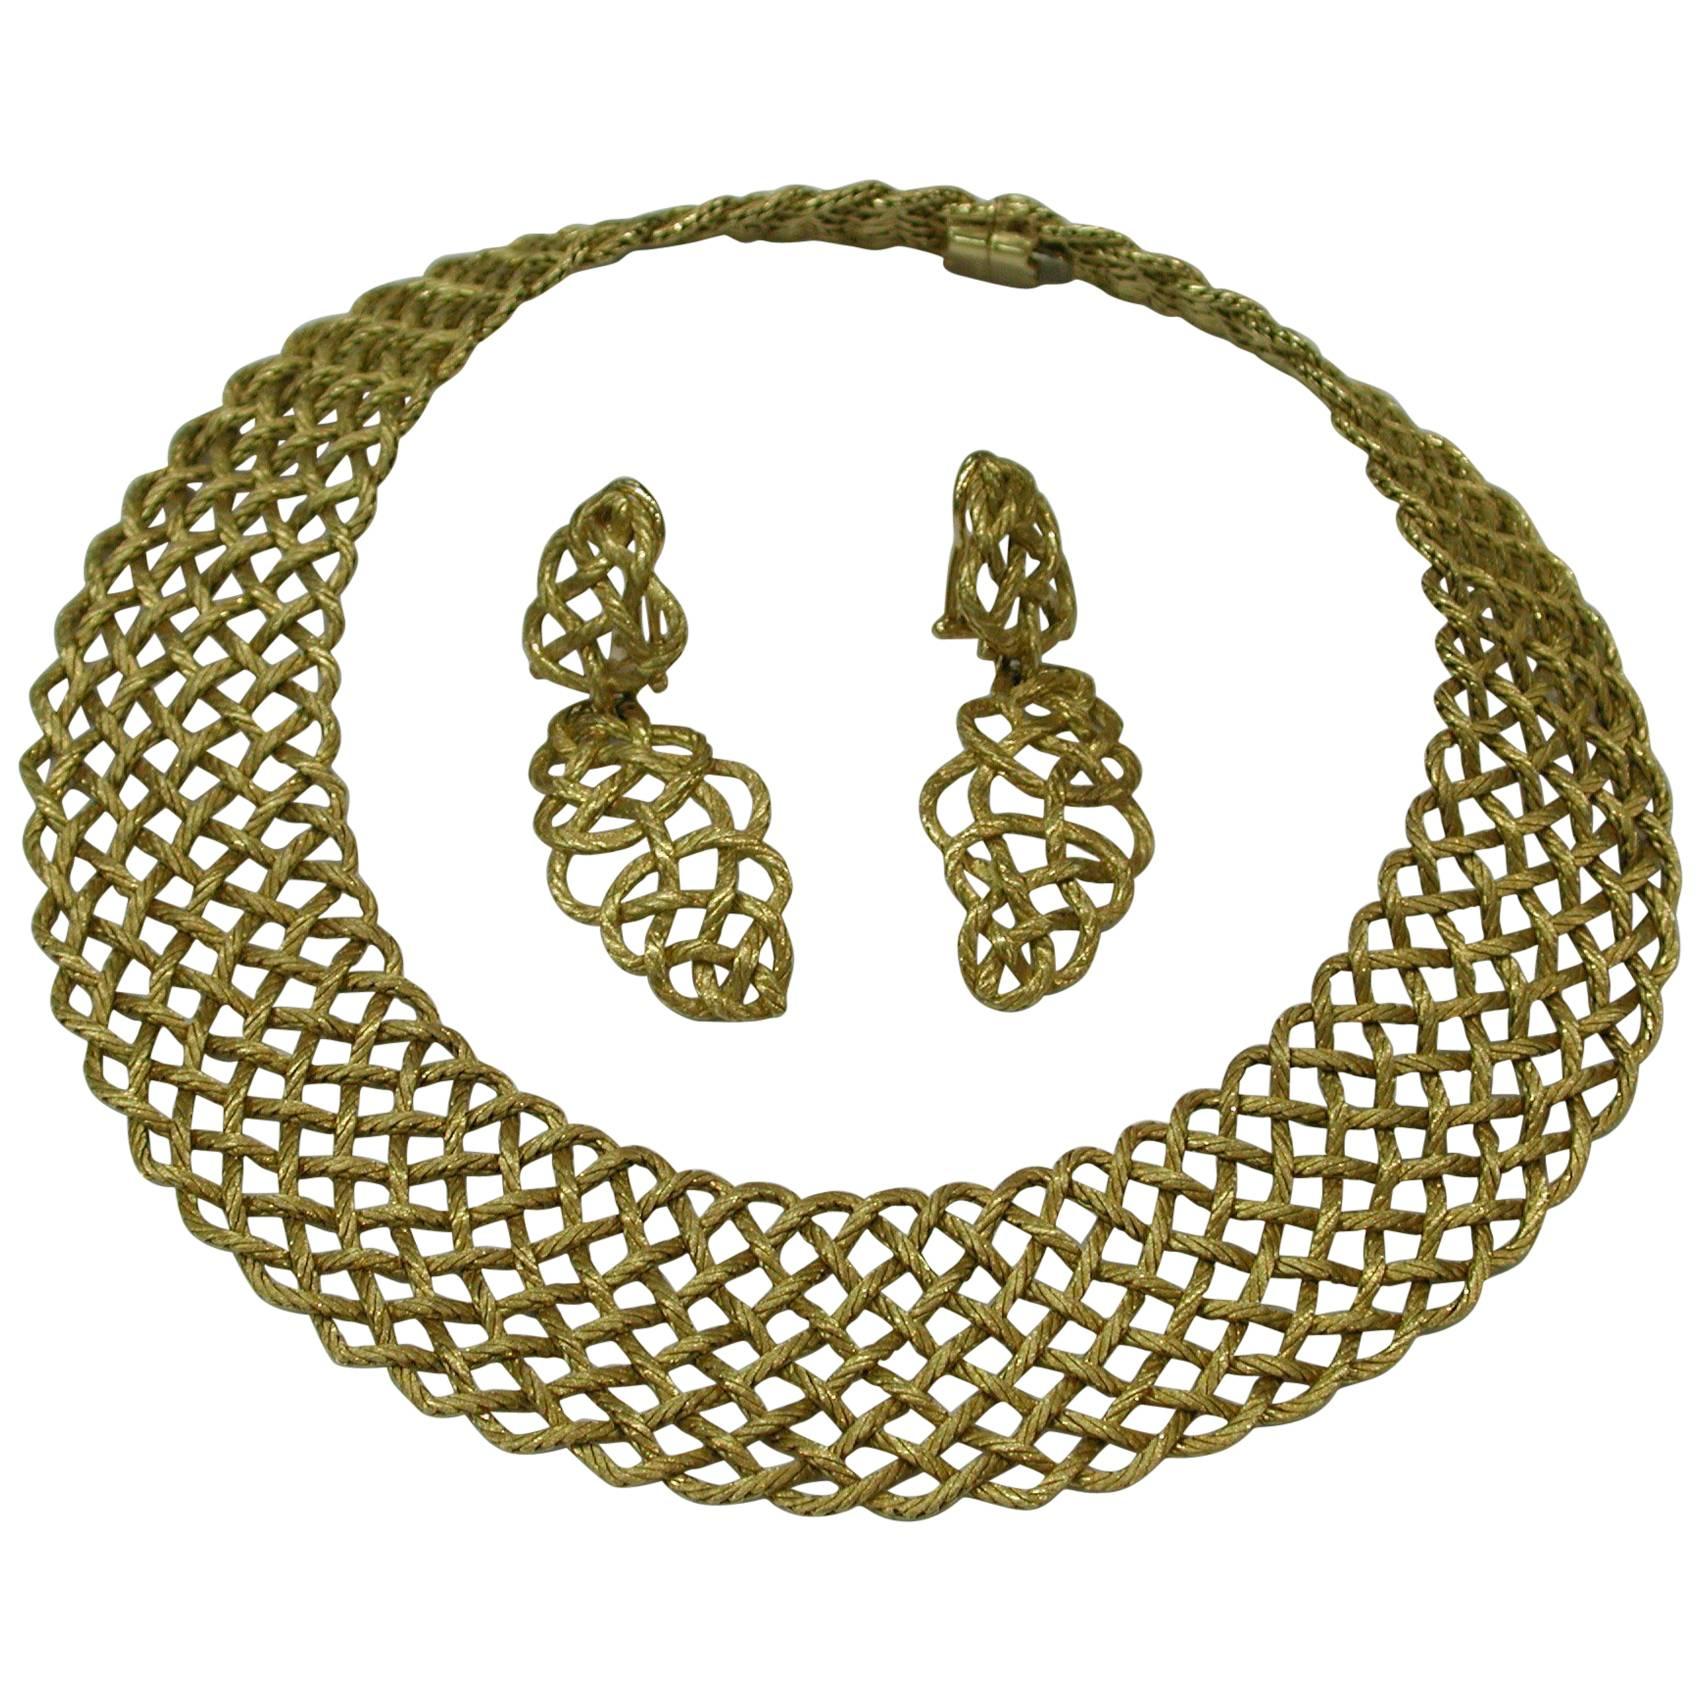 Buccellati Yellow Gold Crepe de Chine Woven Collar Necklace and Earrings